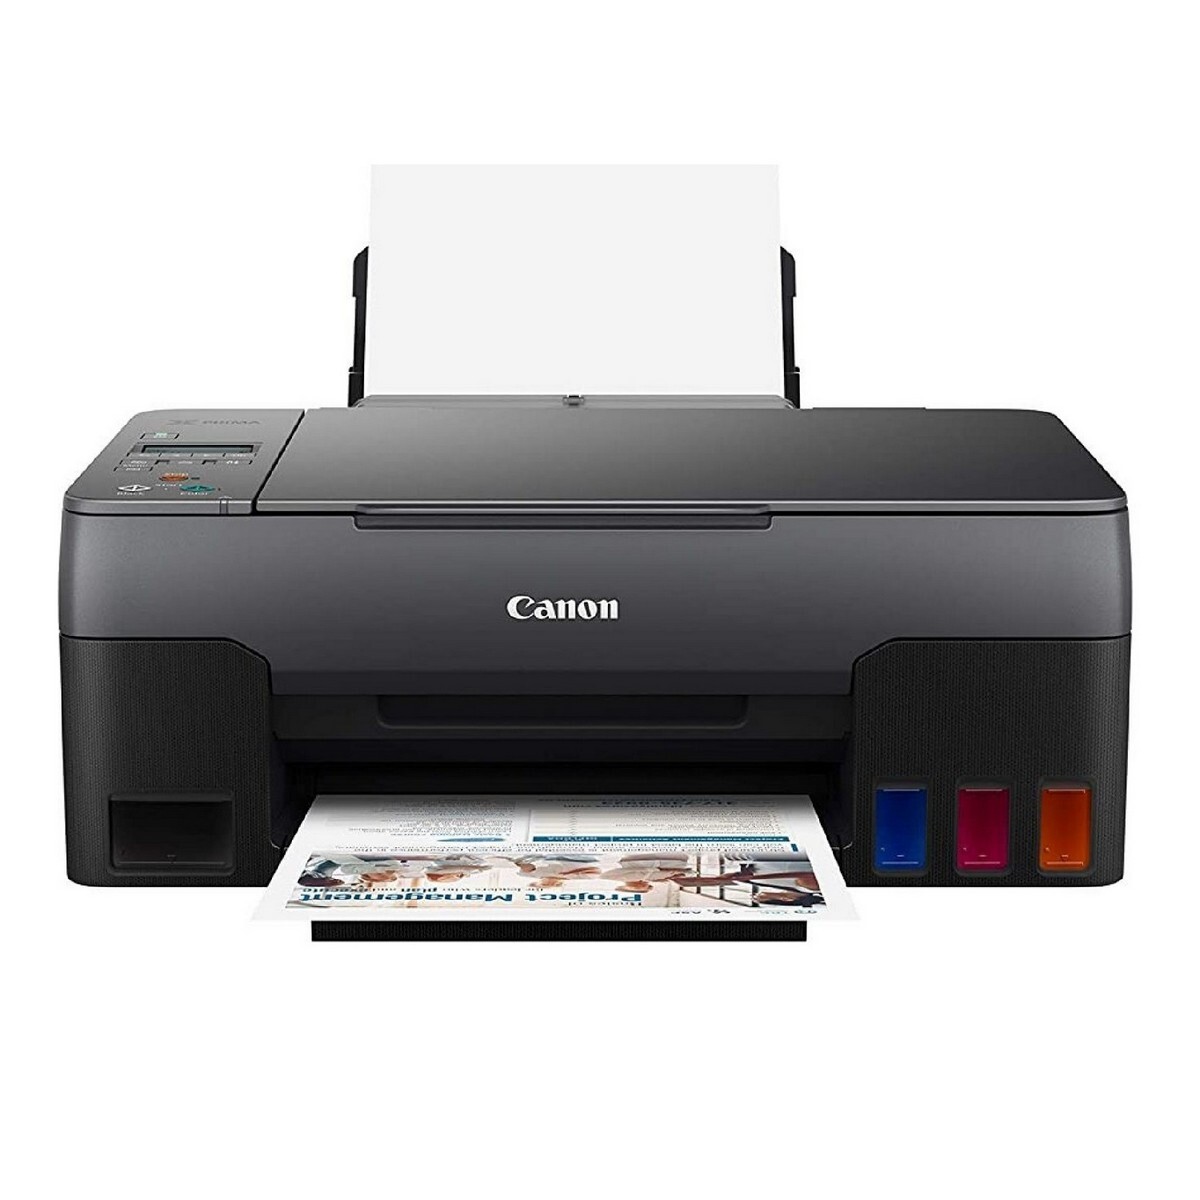 Canon PIXMA G2020 NV All-in-One Ink Tank Colour Printer Multi-function Monochrome Inkjet Printer with Voice Activated Printing Google Assistant